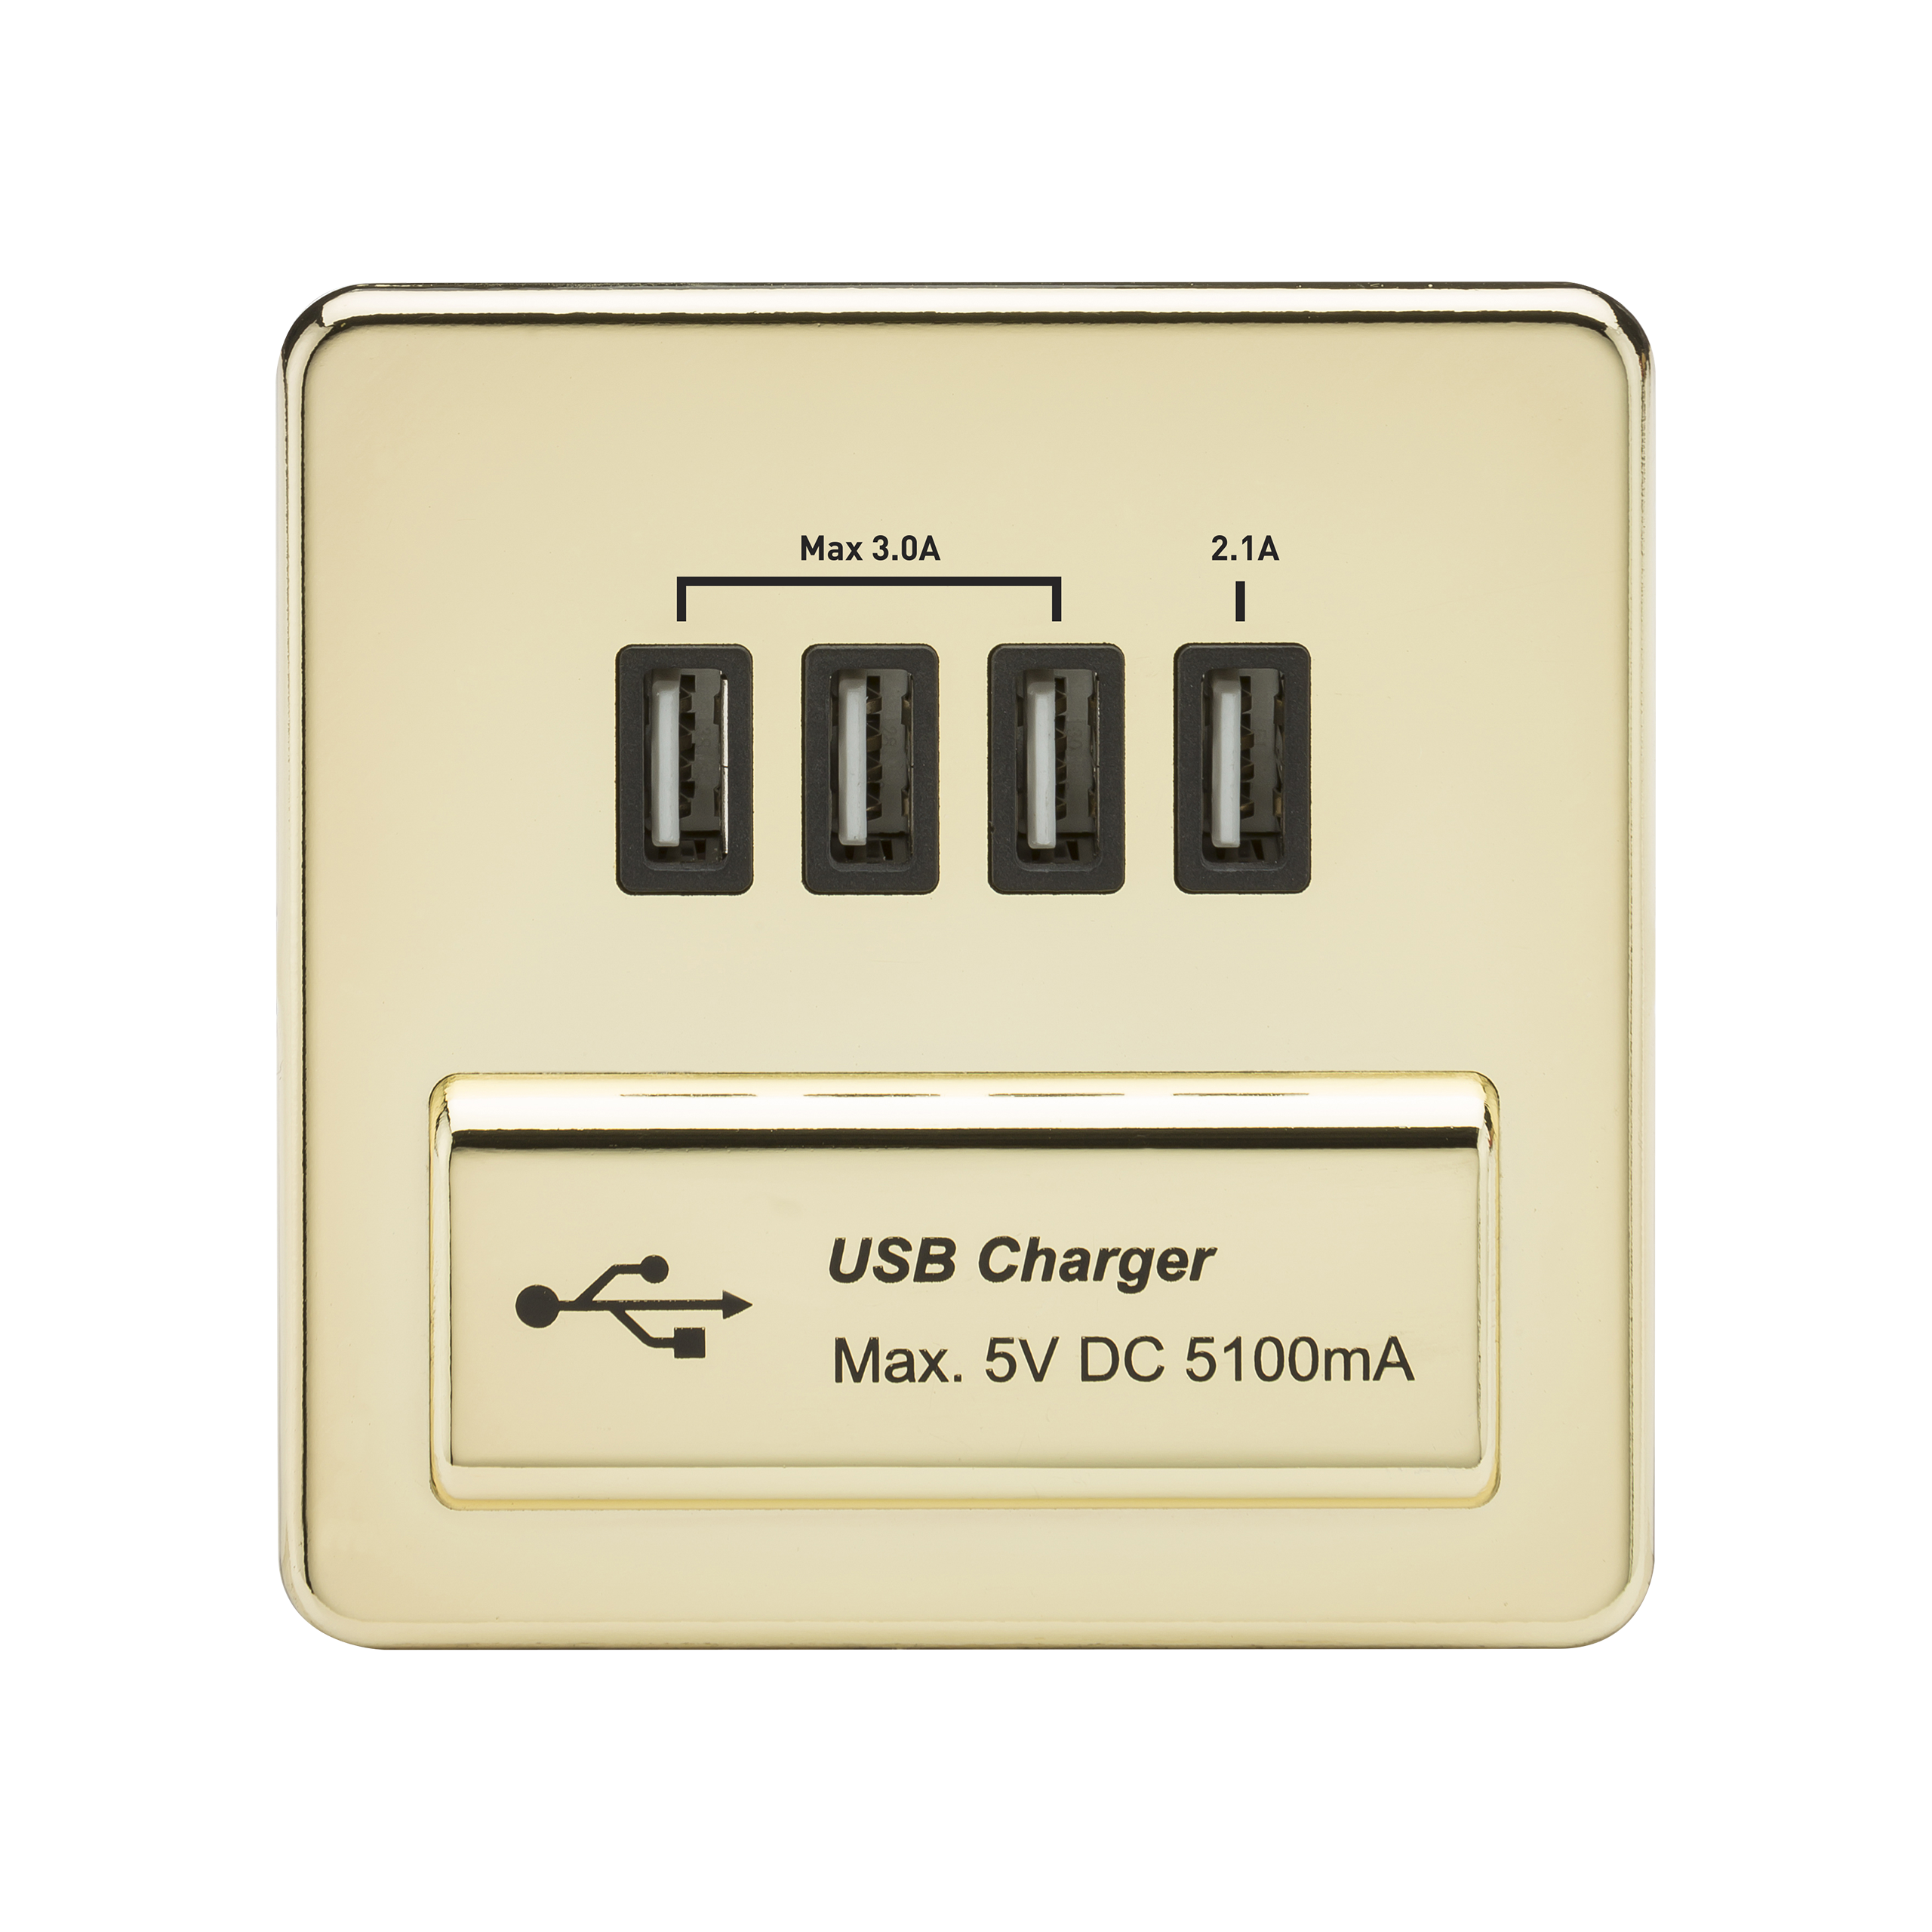 Screwless Quad USB Charger Outlet (5.1A) - Polished Brass With Black Insert - SFQUADPB 